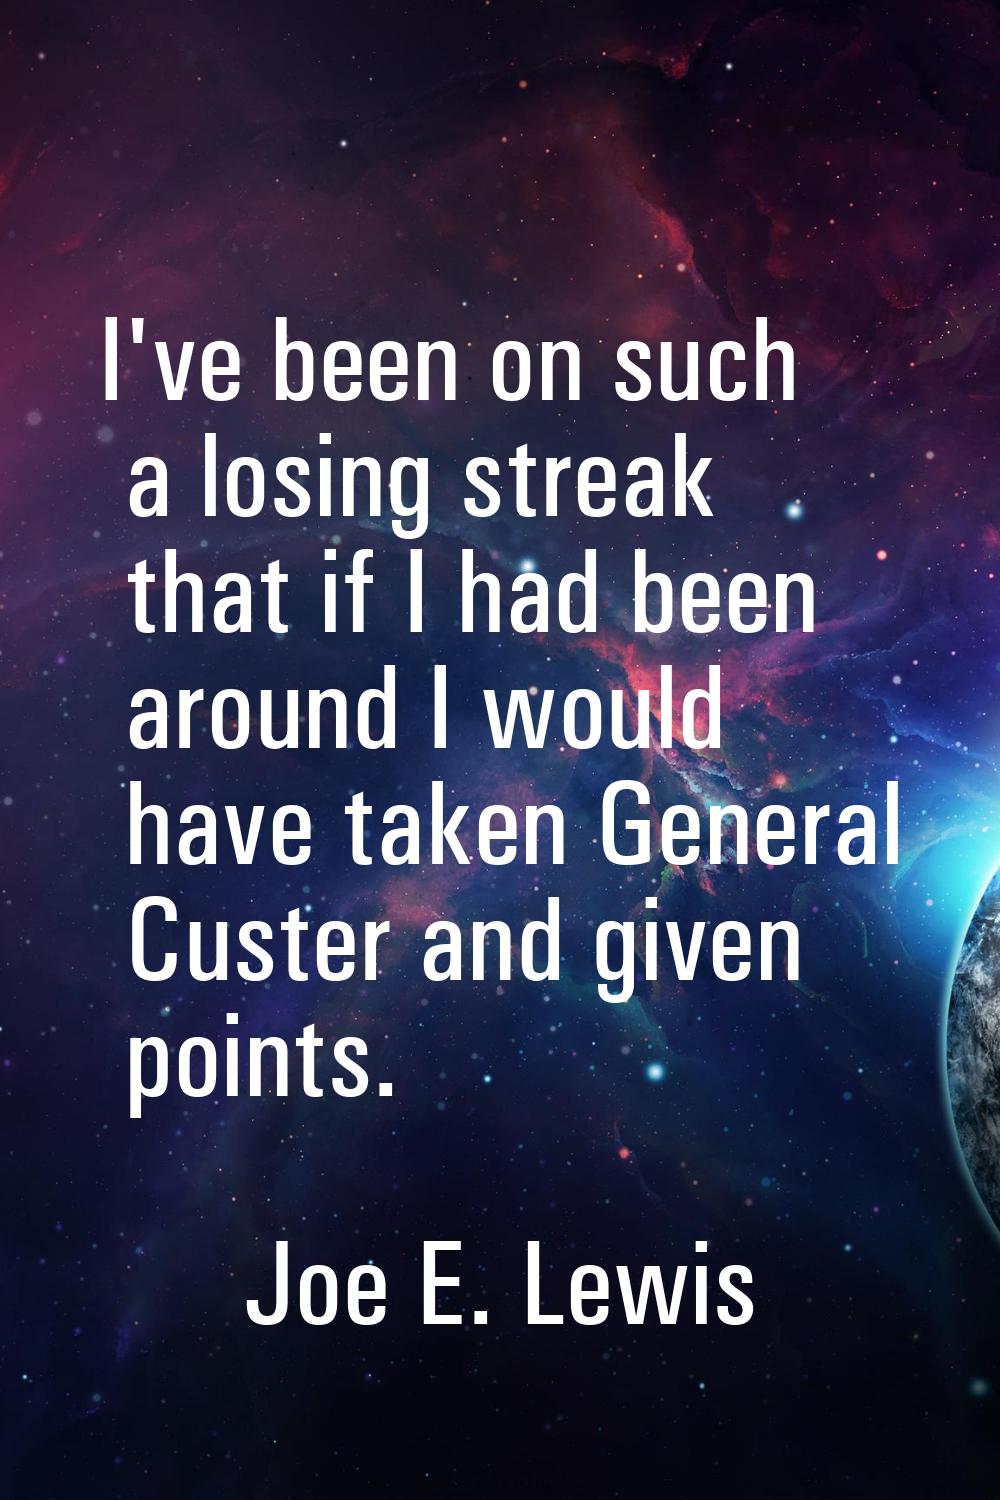 I've been on such a losing streak that if I had been around I would have taken General Custer and g